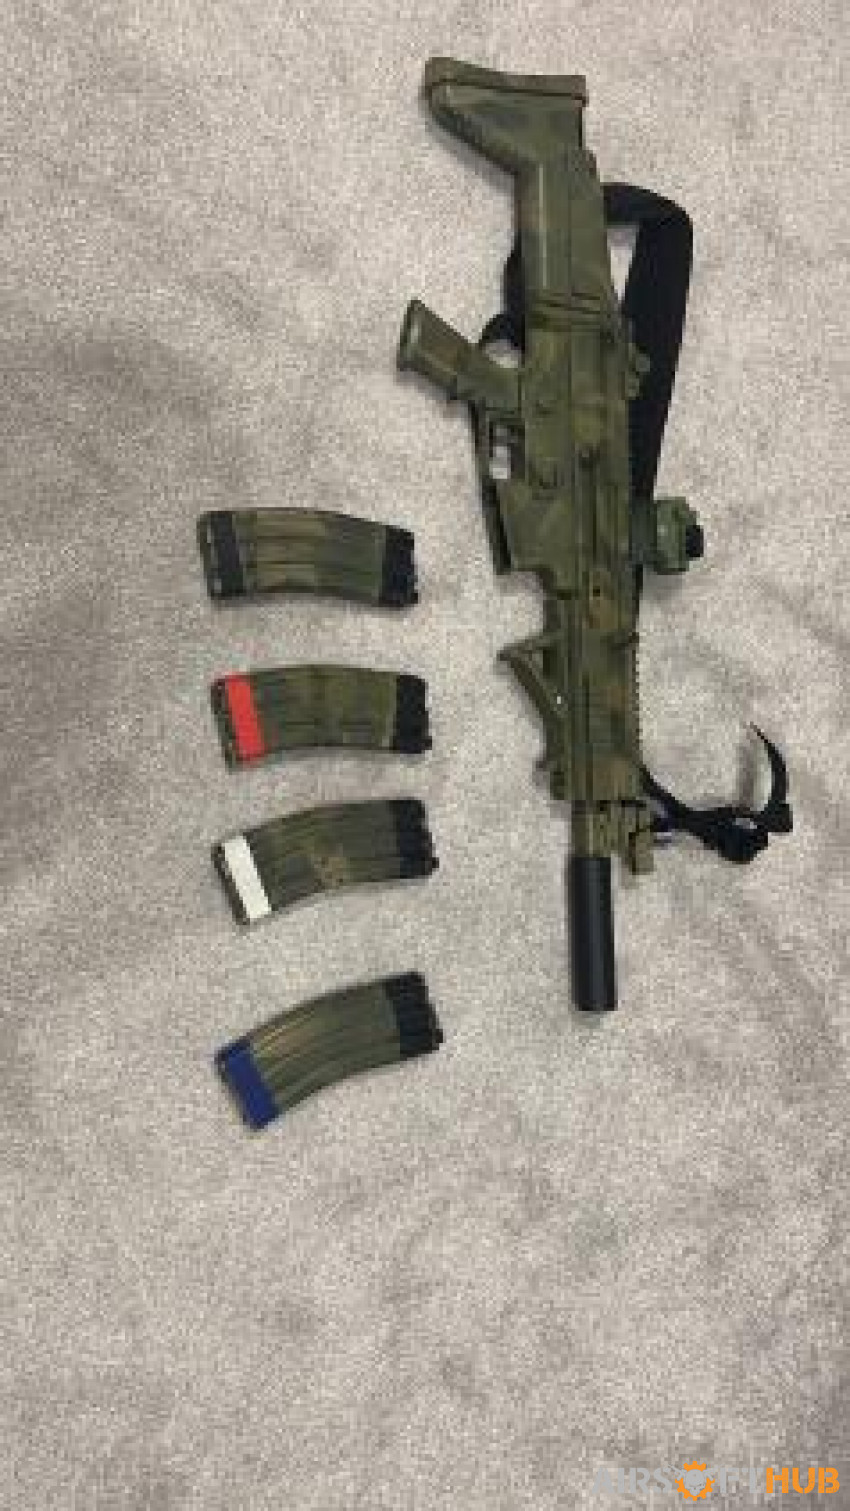 UPGRADED WE TECH SCAR L - Used airsoft equipment